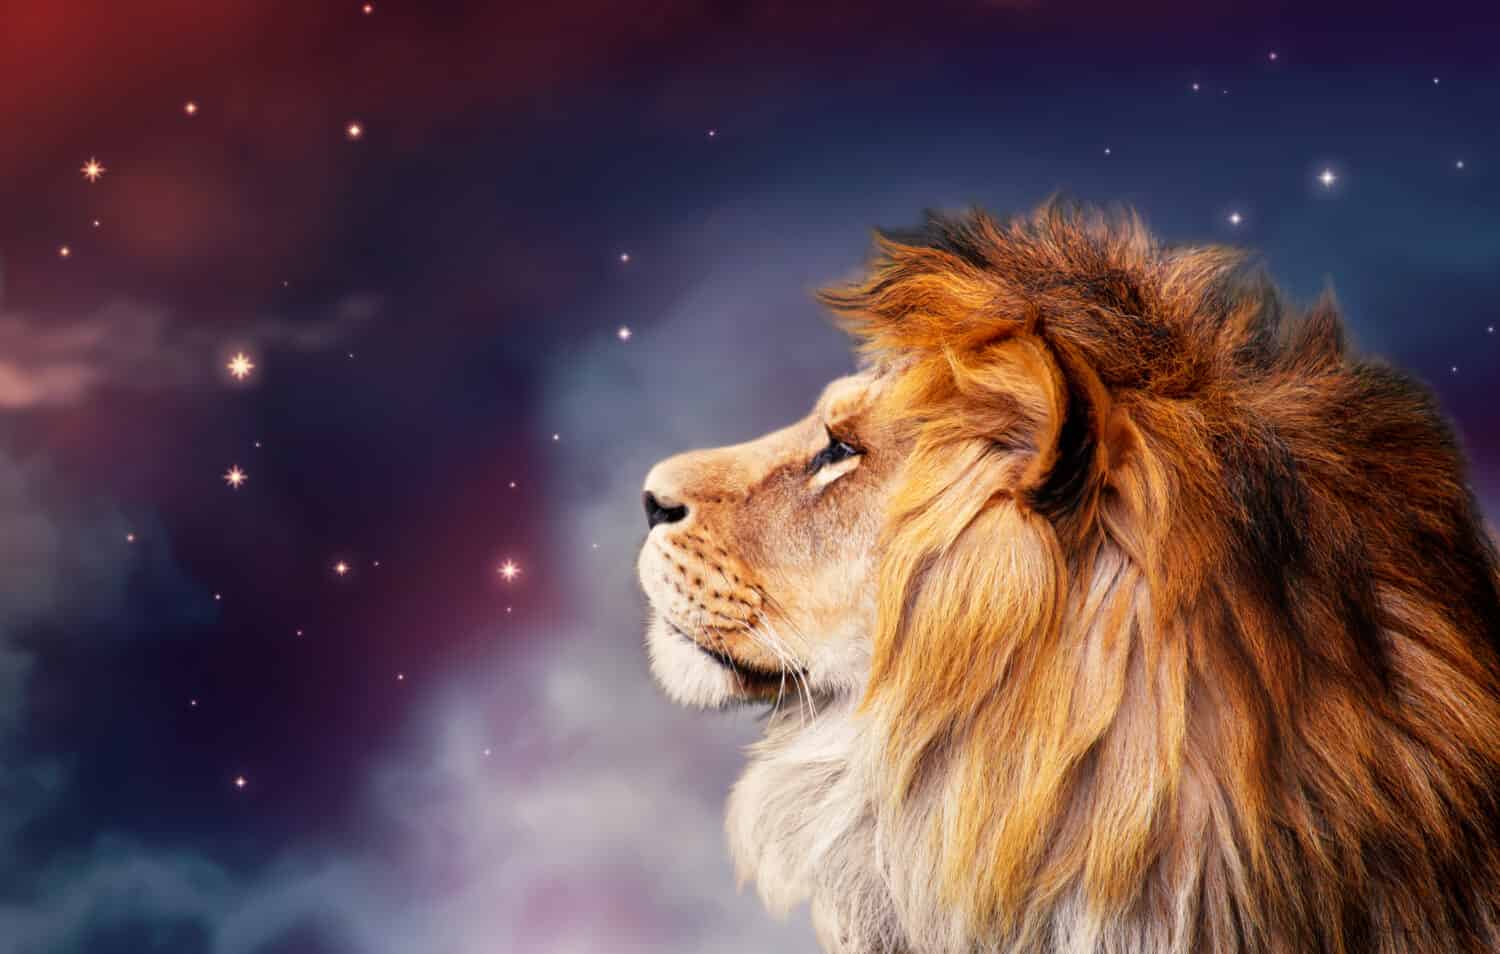 African lion and night in Africa. African savannah moonlight landscape, king of animals. Proud dreaming fantasy lion in savanna looking forward on stars. Majestic dramatic deep starry sky.